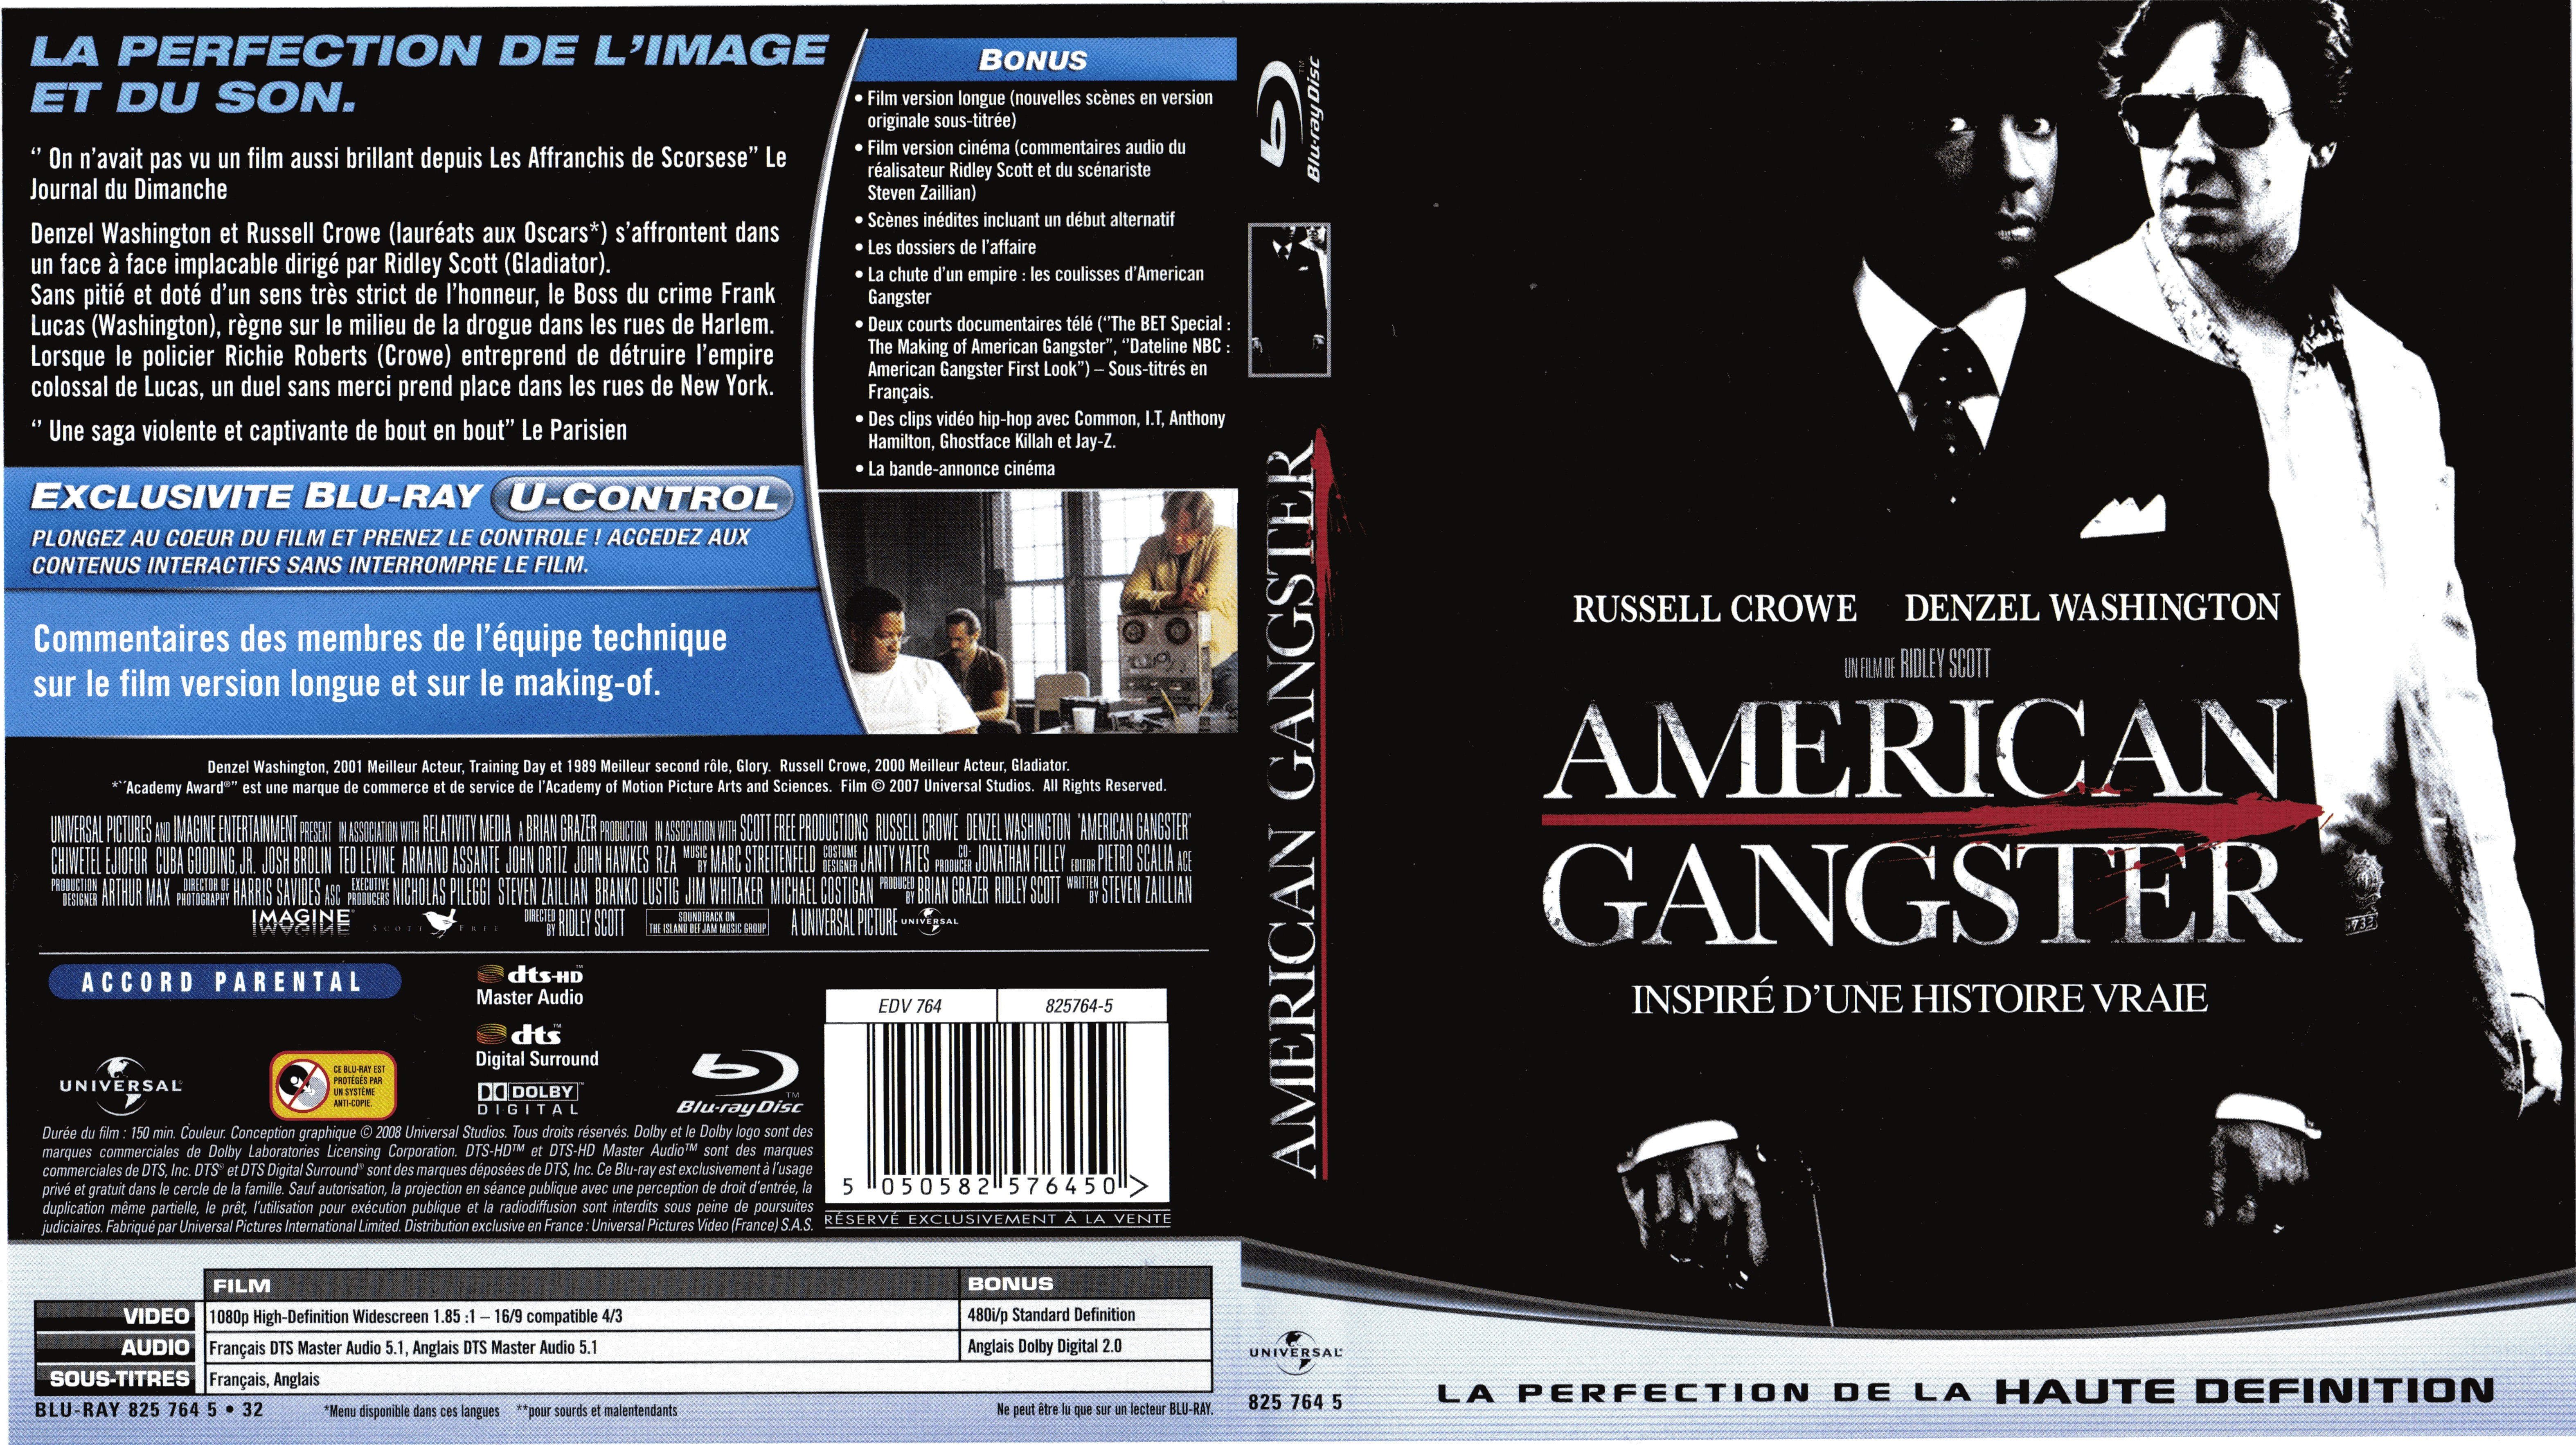 Jaquette DVD American gangster (BLU-RAY)